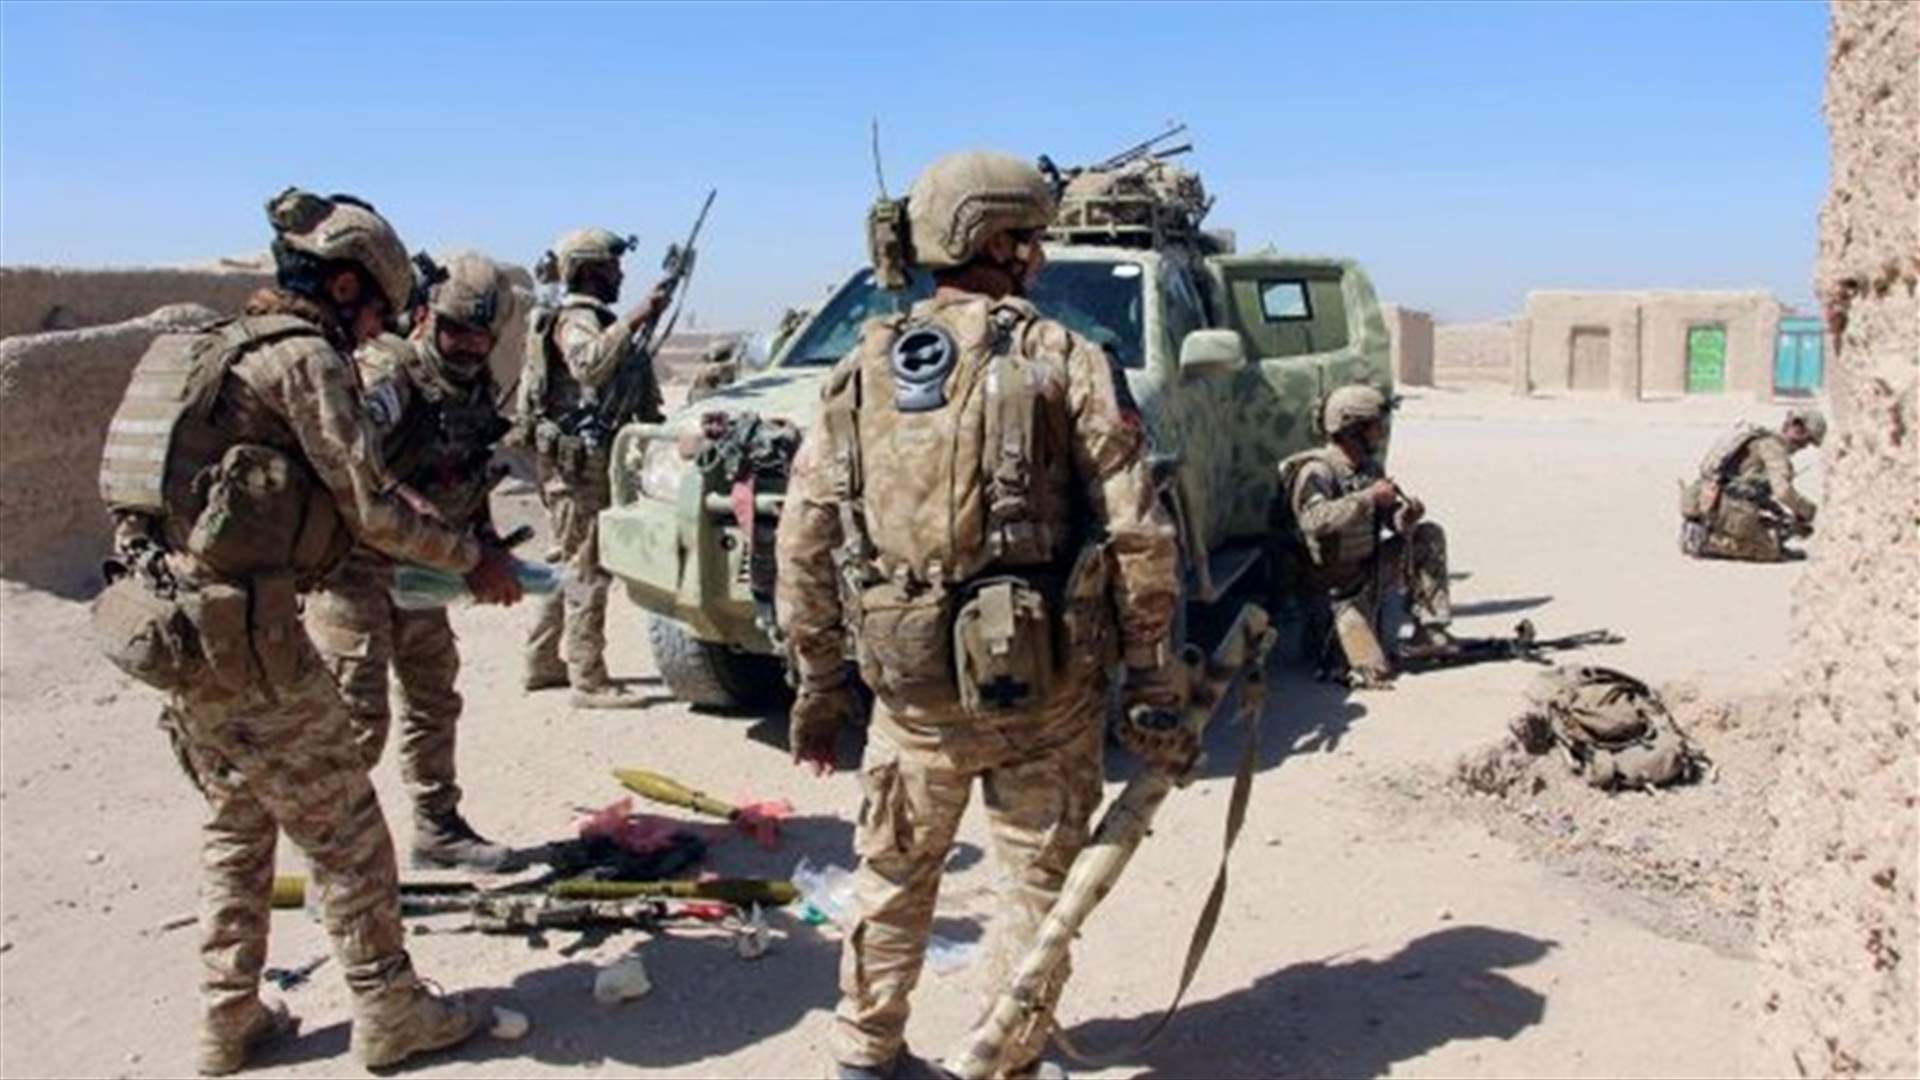 Three US troops wounded after Afghan soldier opens fire